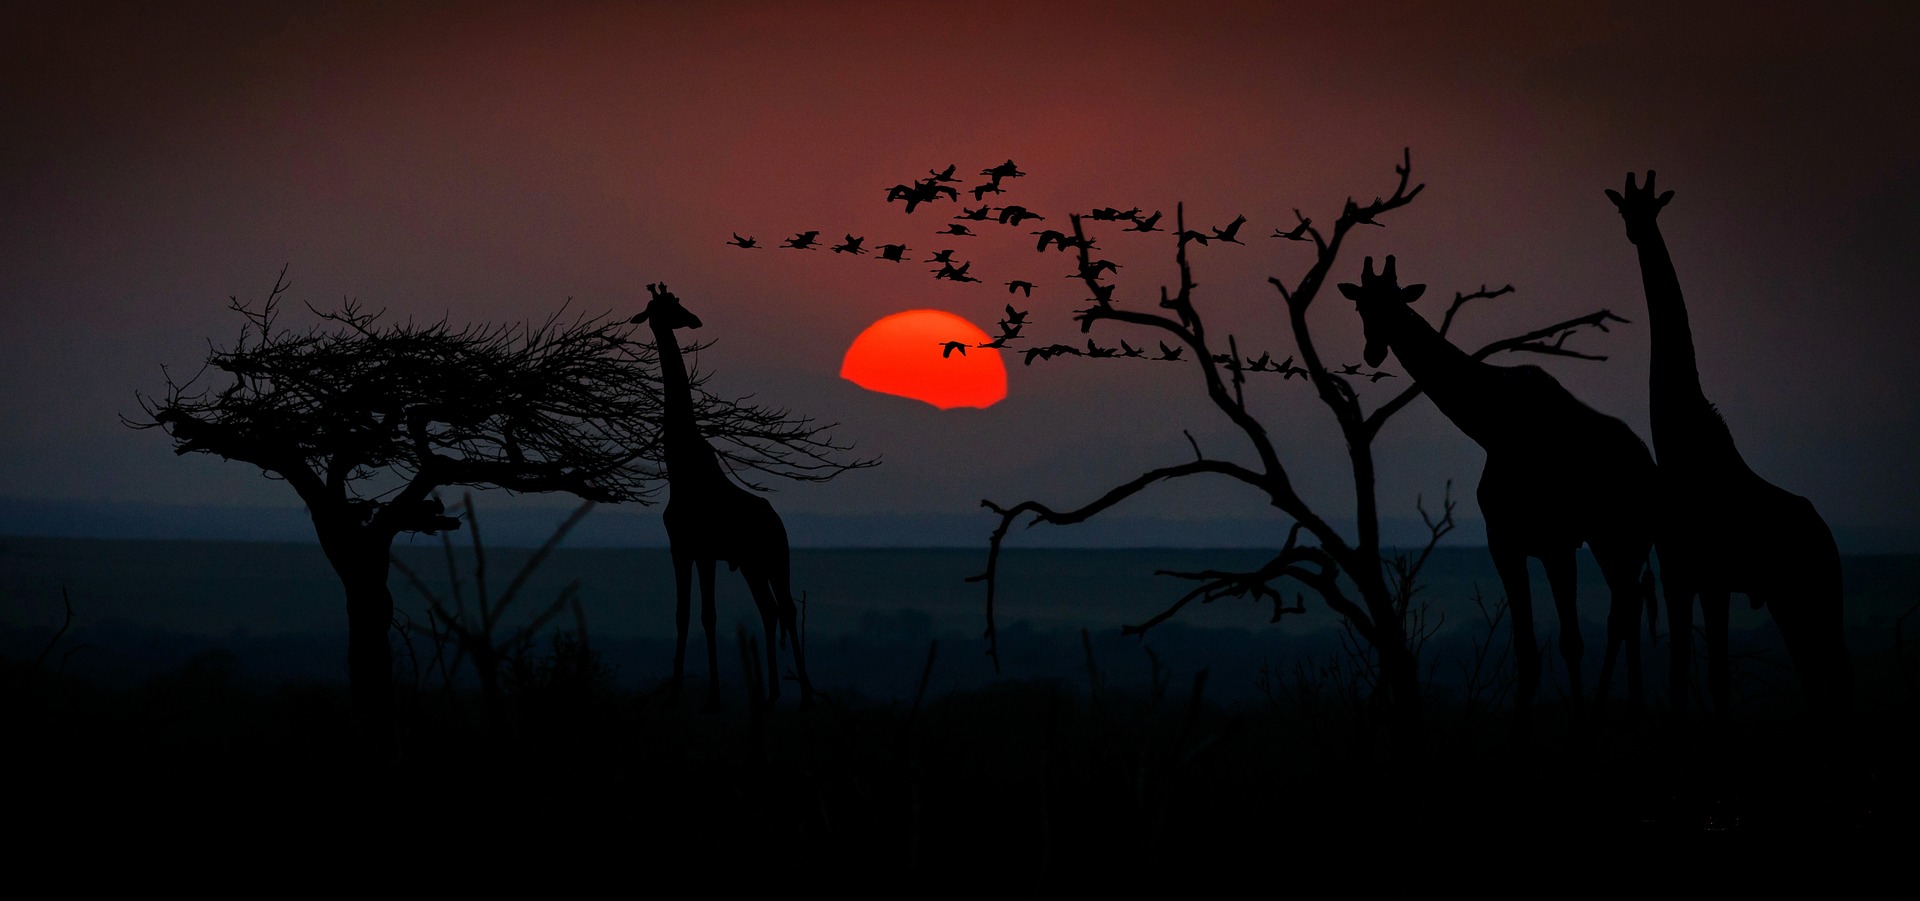 An African savannah, it is early dawn or late sunset and we can see silhouettes of the giraffes, flying birds and trees - as well as the red sun on the horizon